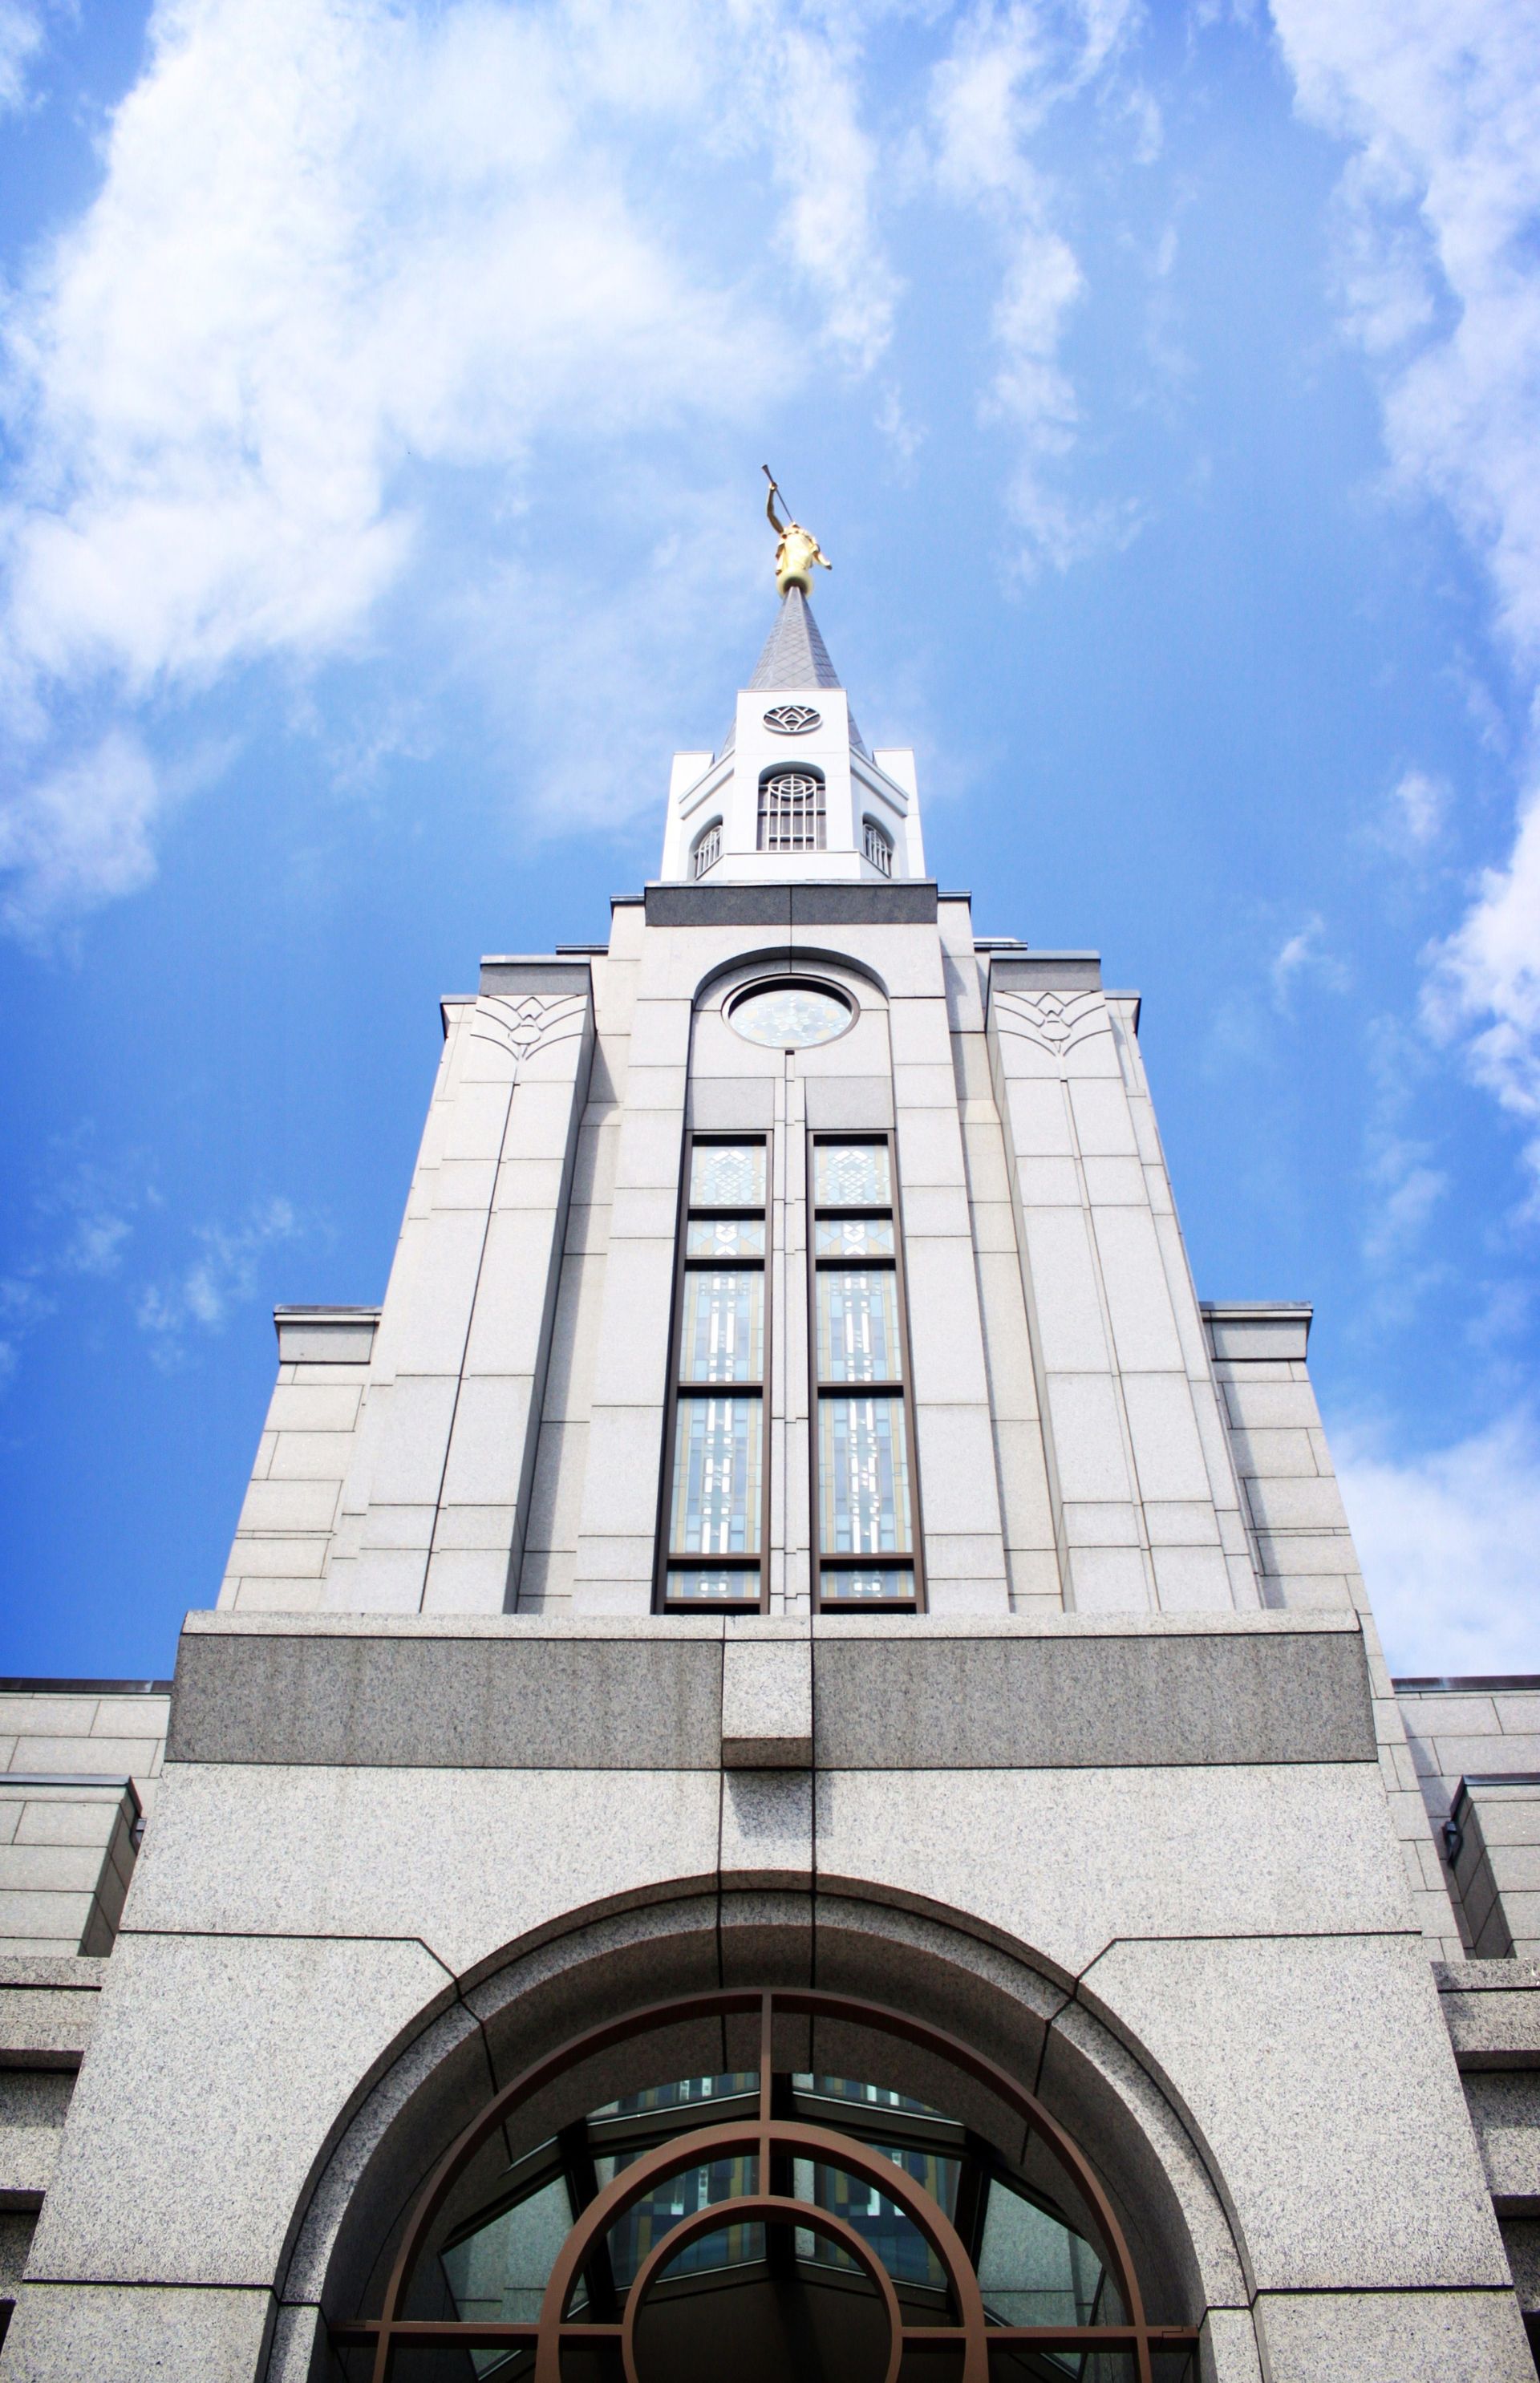 Looking up to the spire of the Boston Massachusetts Temple, with the angel Moroni on top.